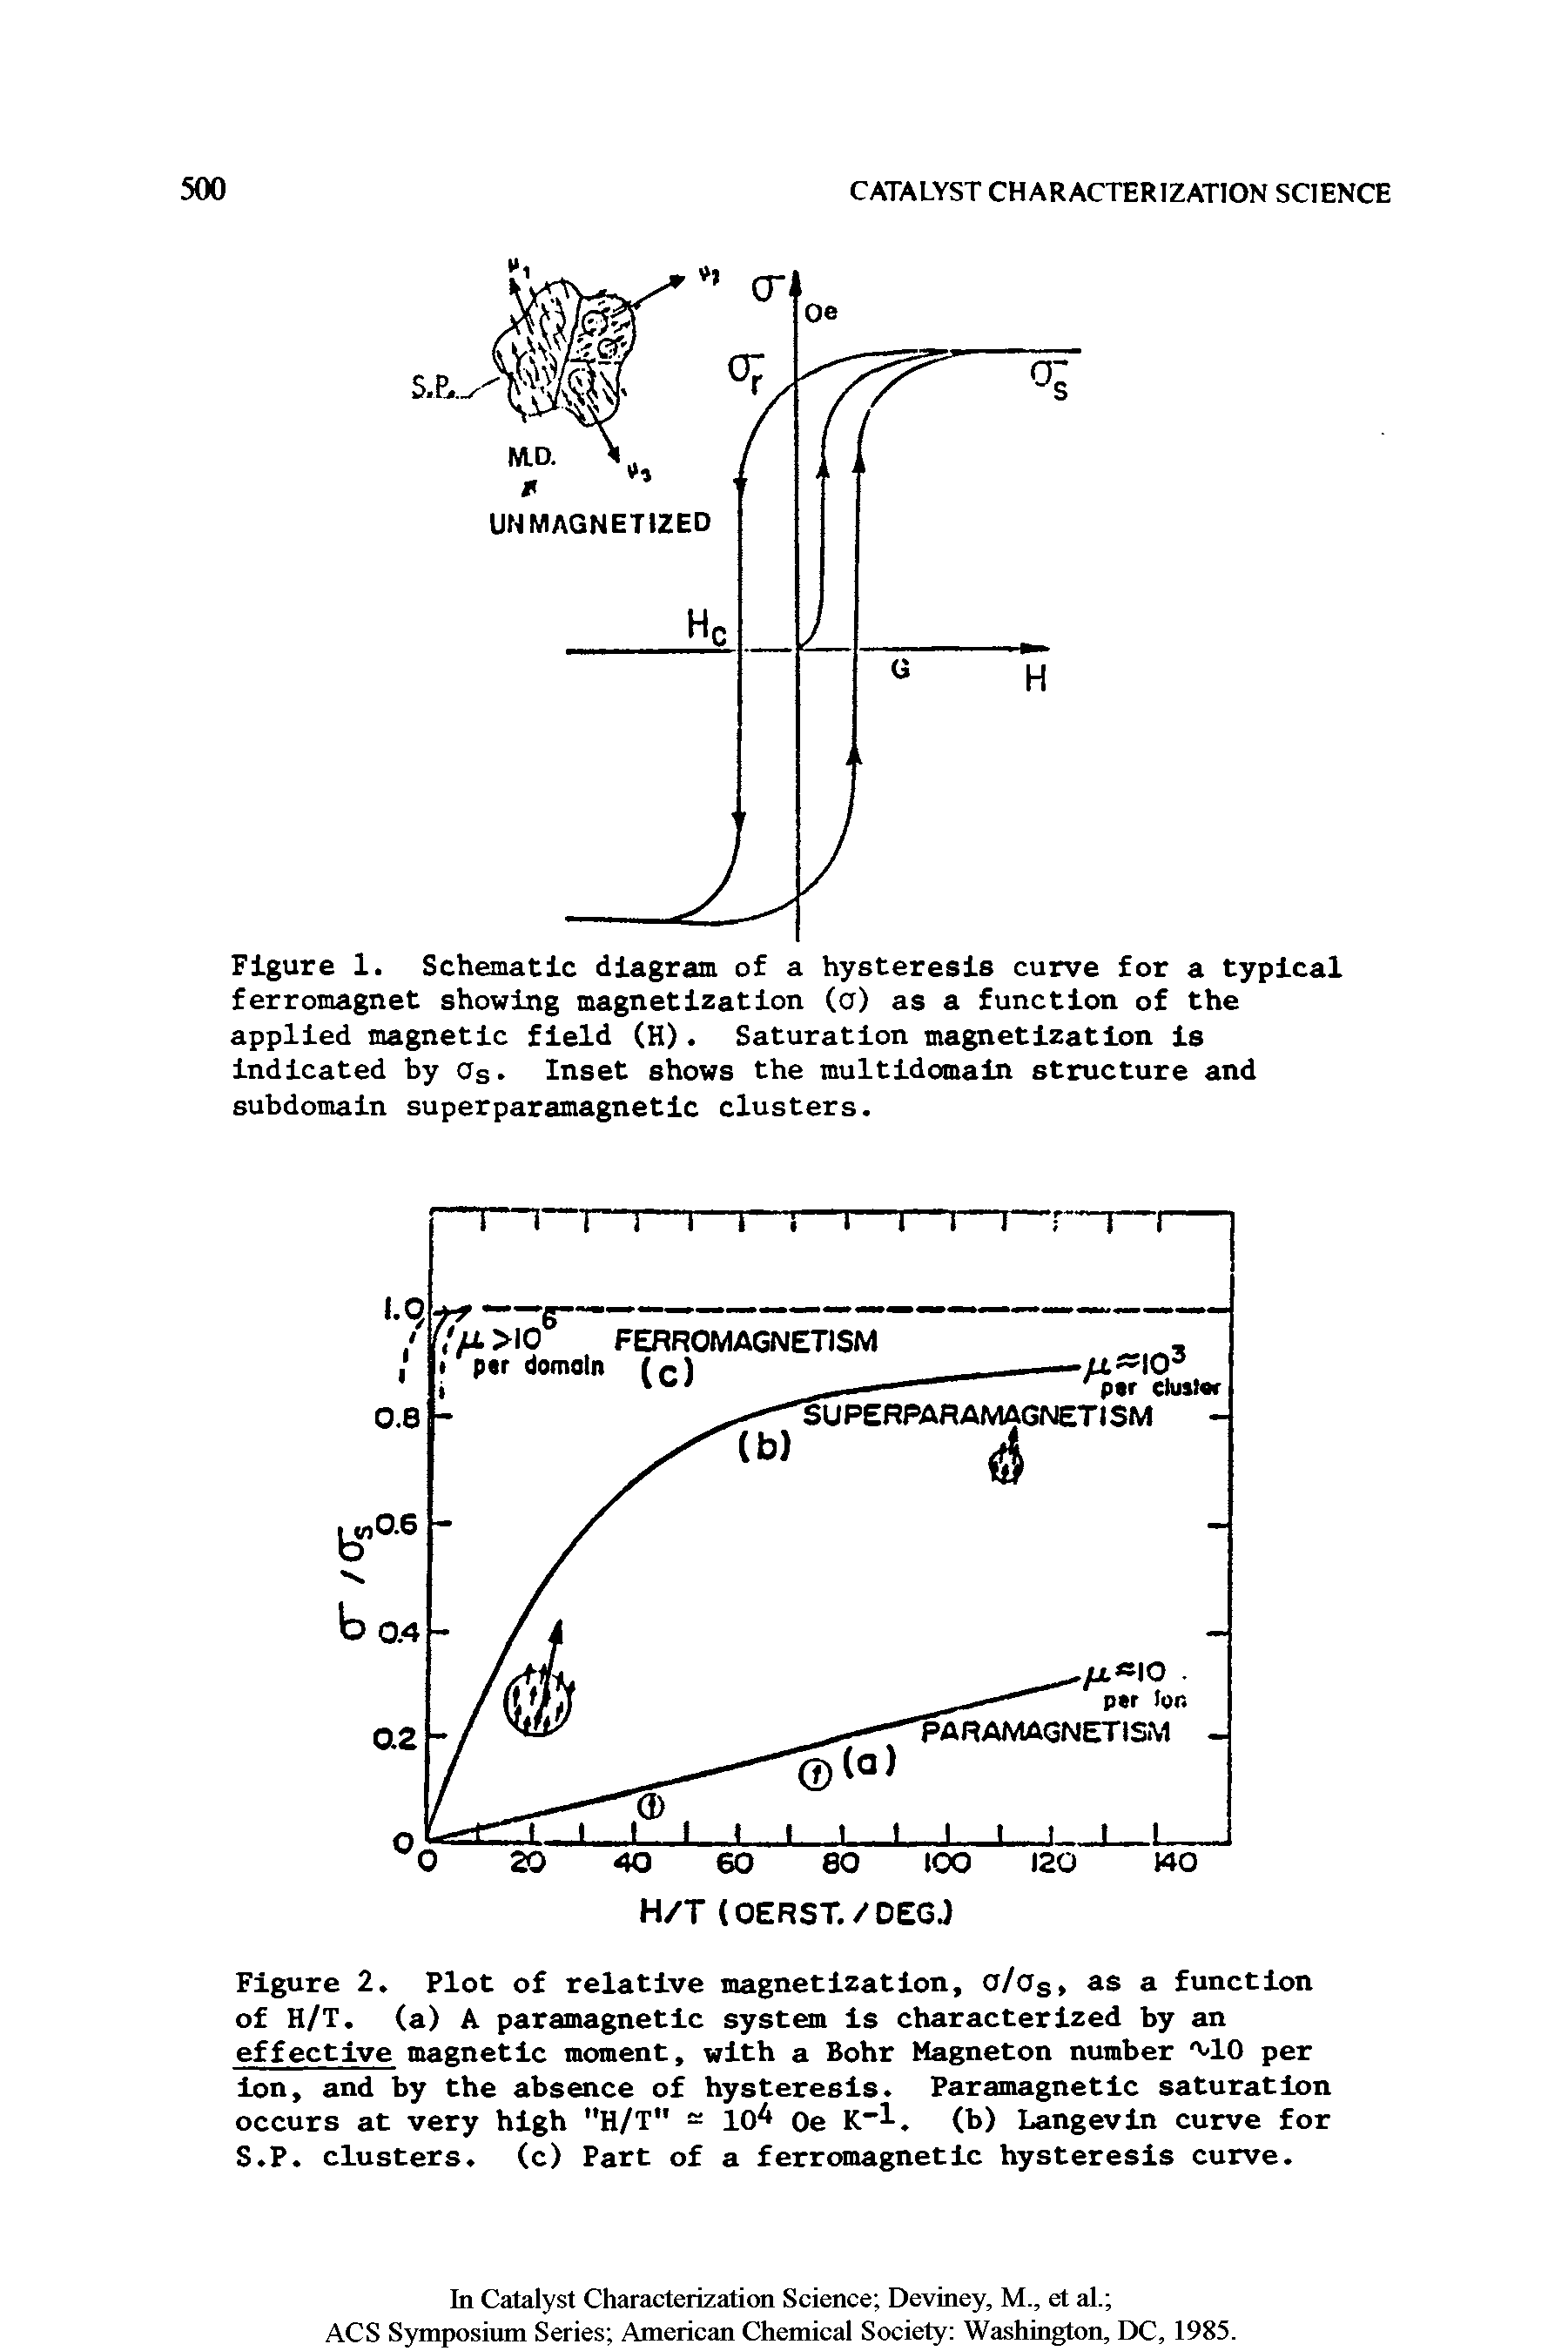 Figure 2. Plot of relative magnetization, a/Os ns a function of H/T. (a) A paramagnetic system Is characterized by an effective magnetic moment, with a Bohr Magneton number vlO per Ion, and by the absence of hysteresis. Paramagnetic saturation occurs at very high "H/T" == 10 Oe K"l. (b) l.angevln curve for S.P. clusters, (c) Part of a ferromagnetic hysteresis curve.